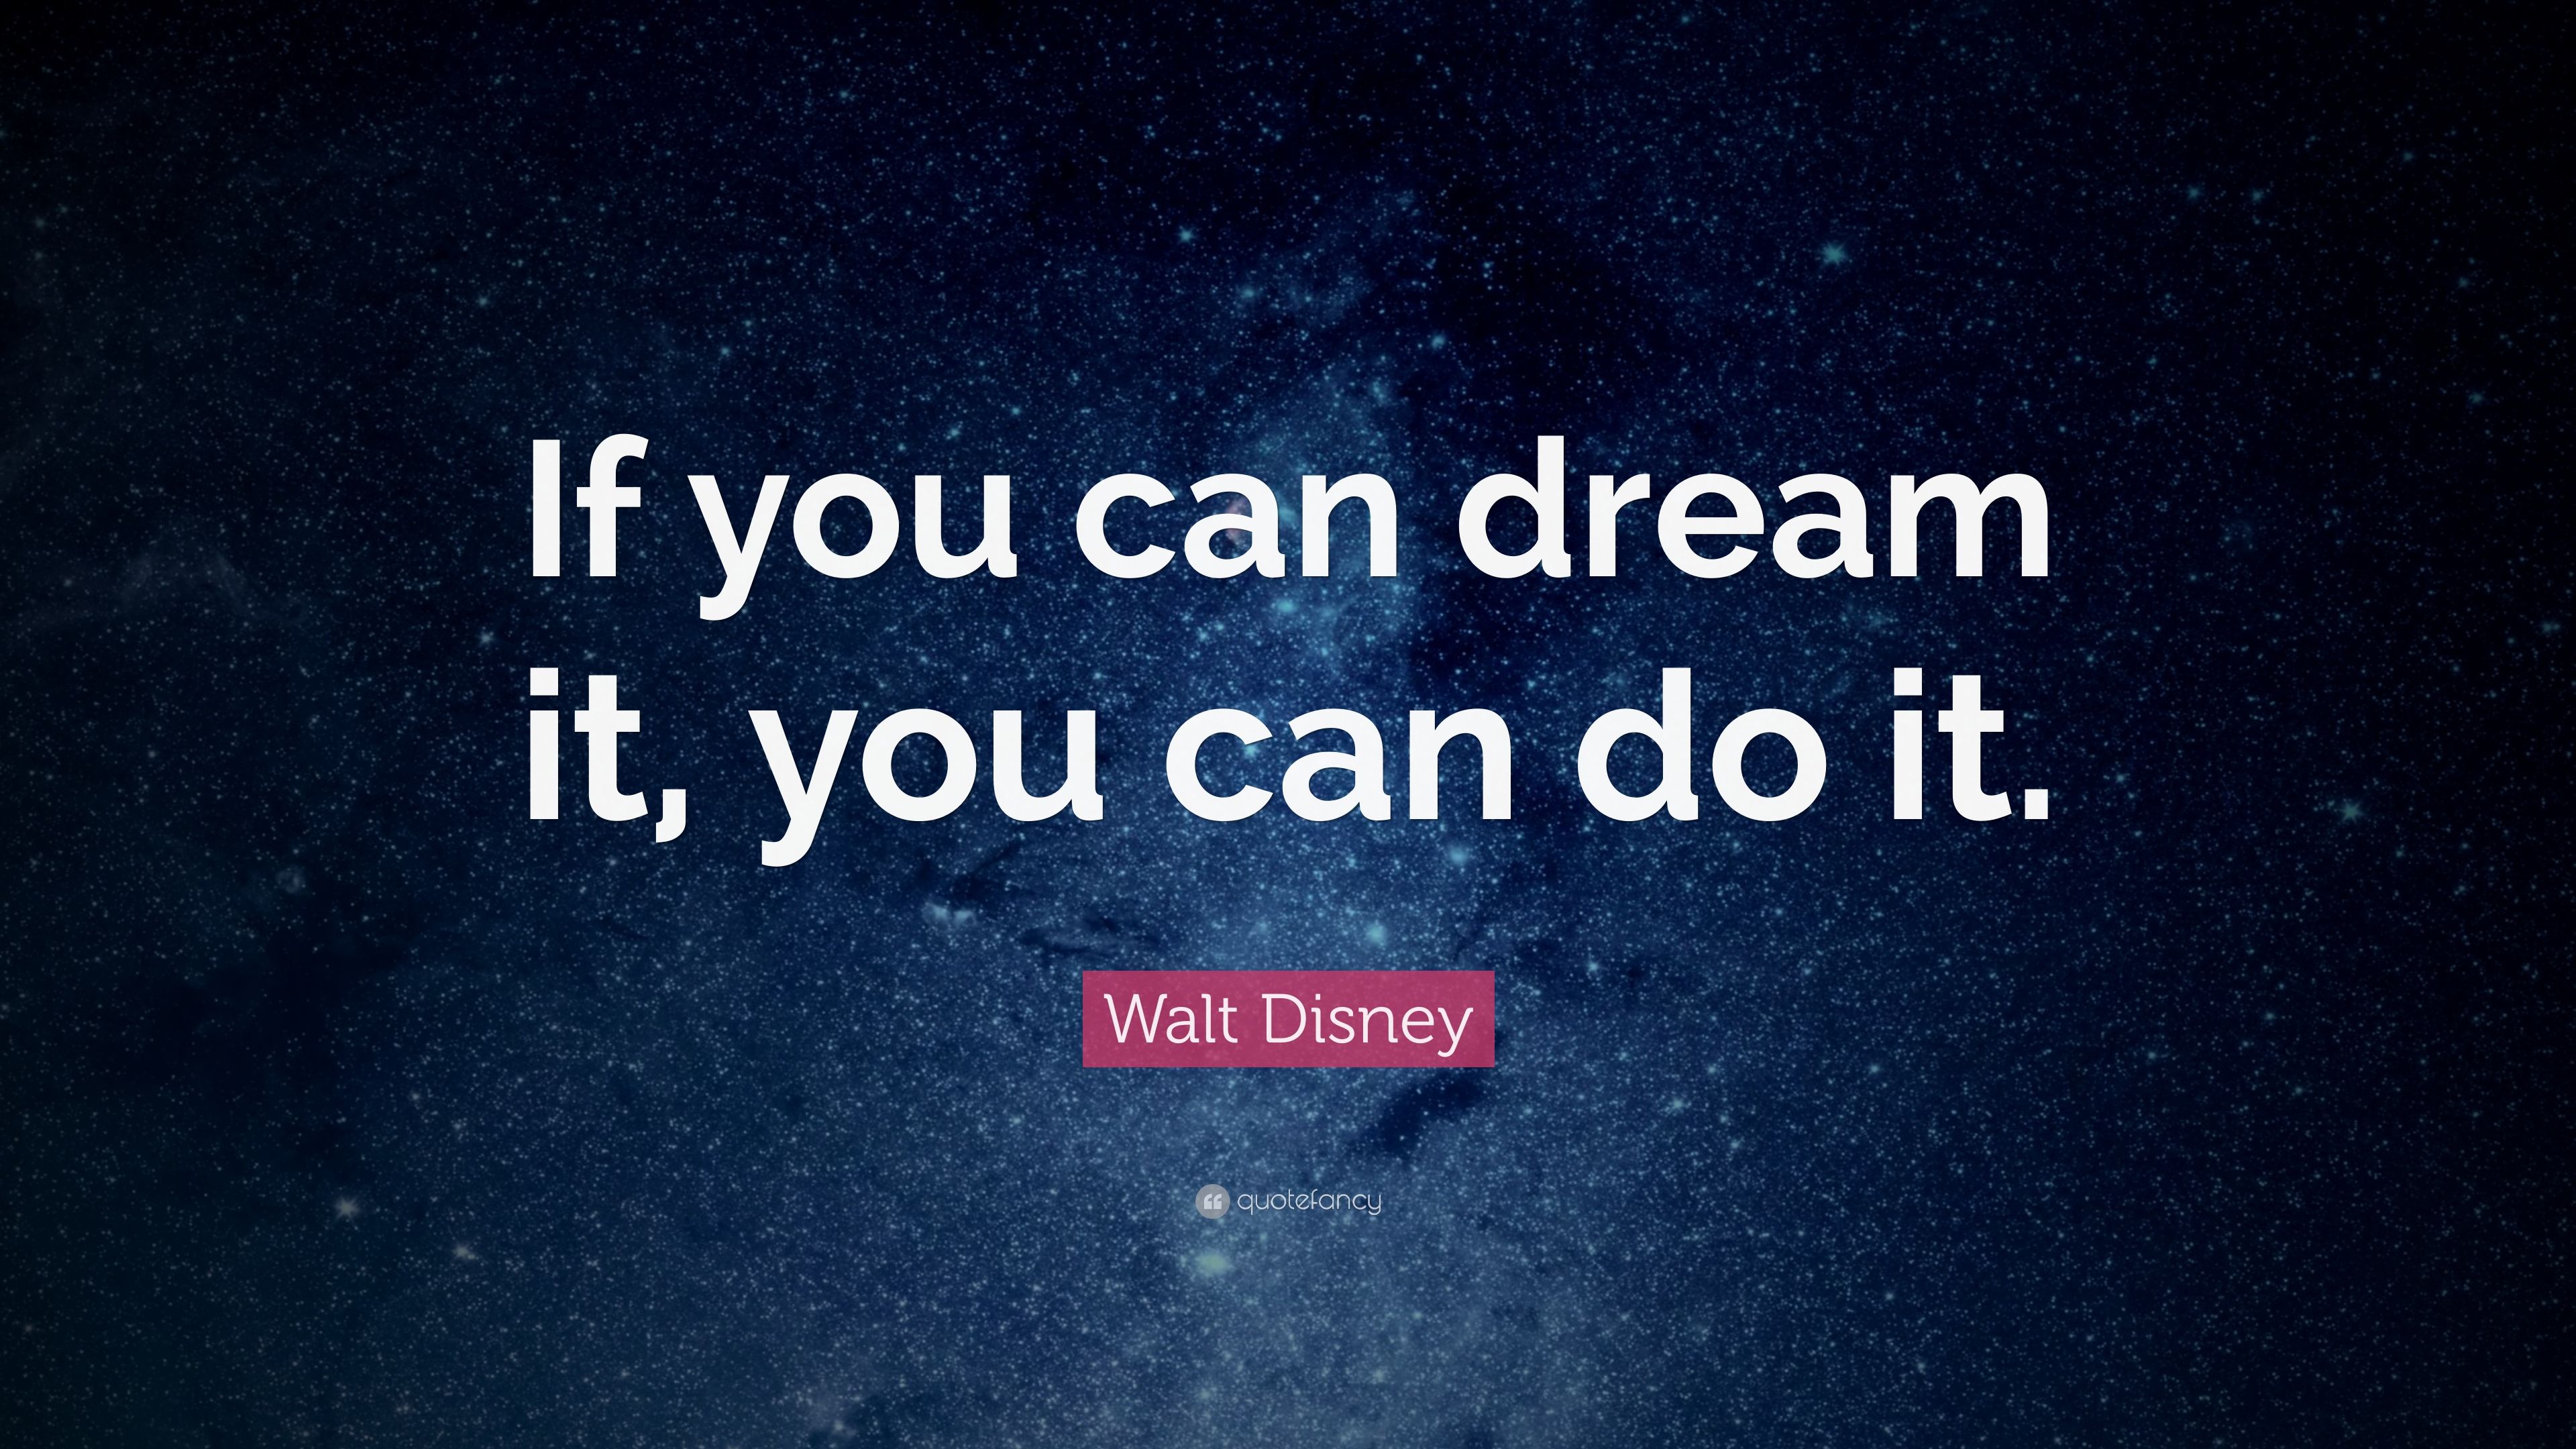 You Can Do It Wallpaper. Mexican Skeleton Wallpaper, Greatest American Hero Wallpaper and African Romantic Wallpaper